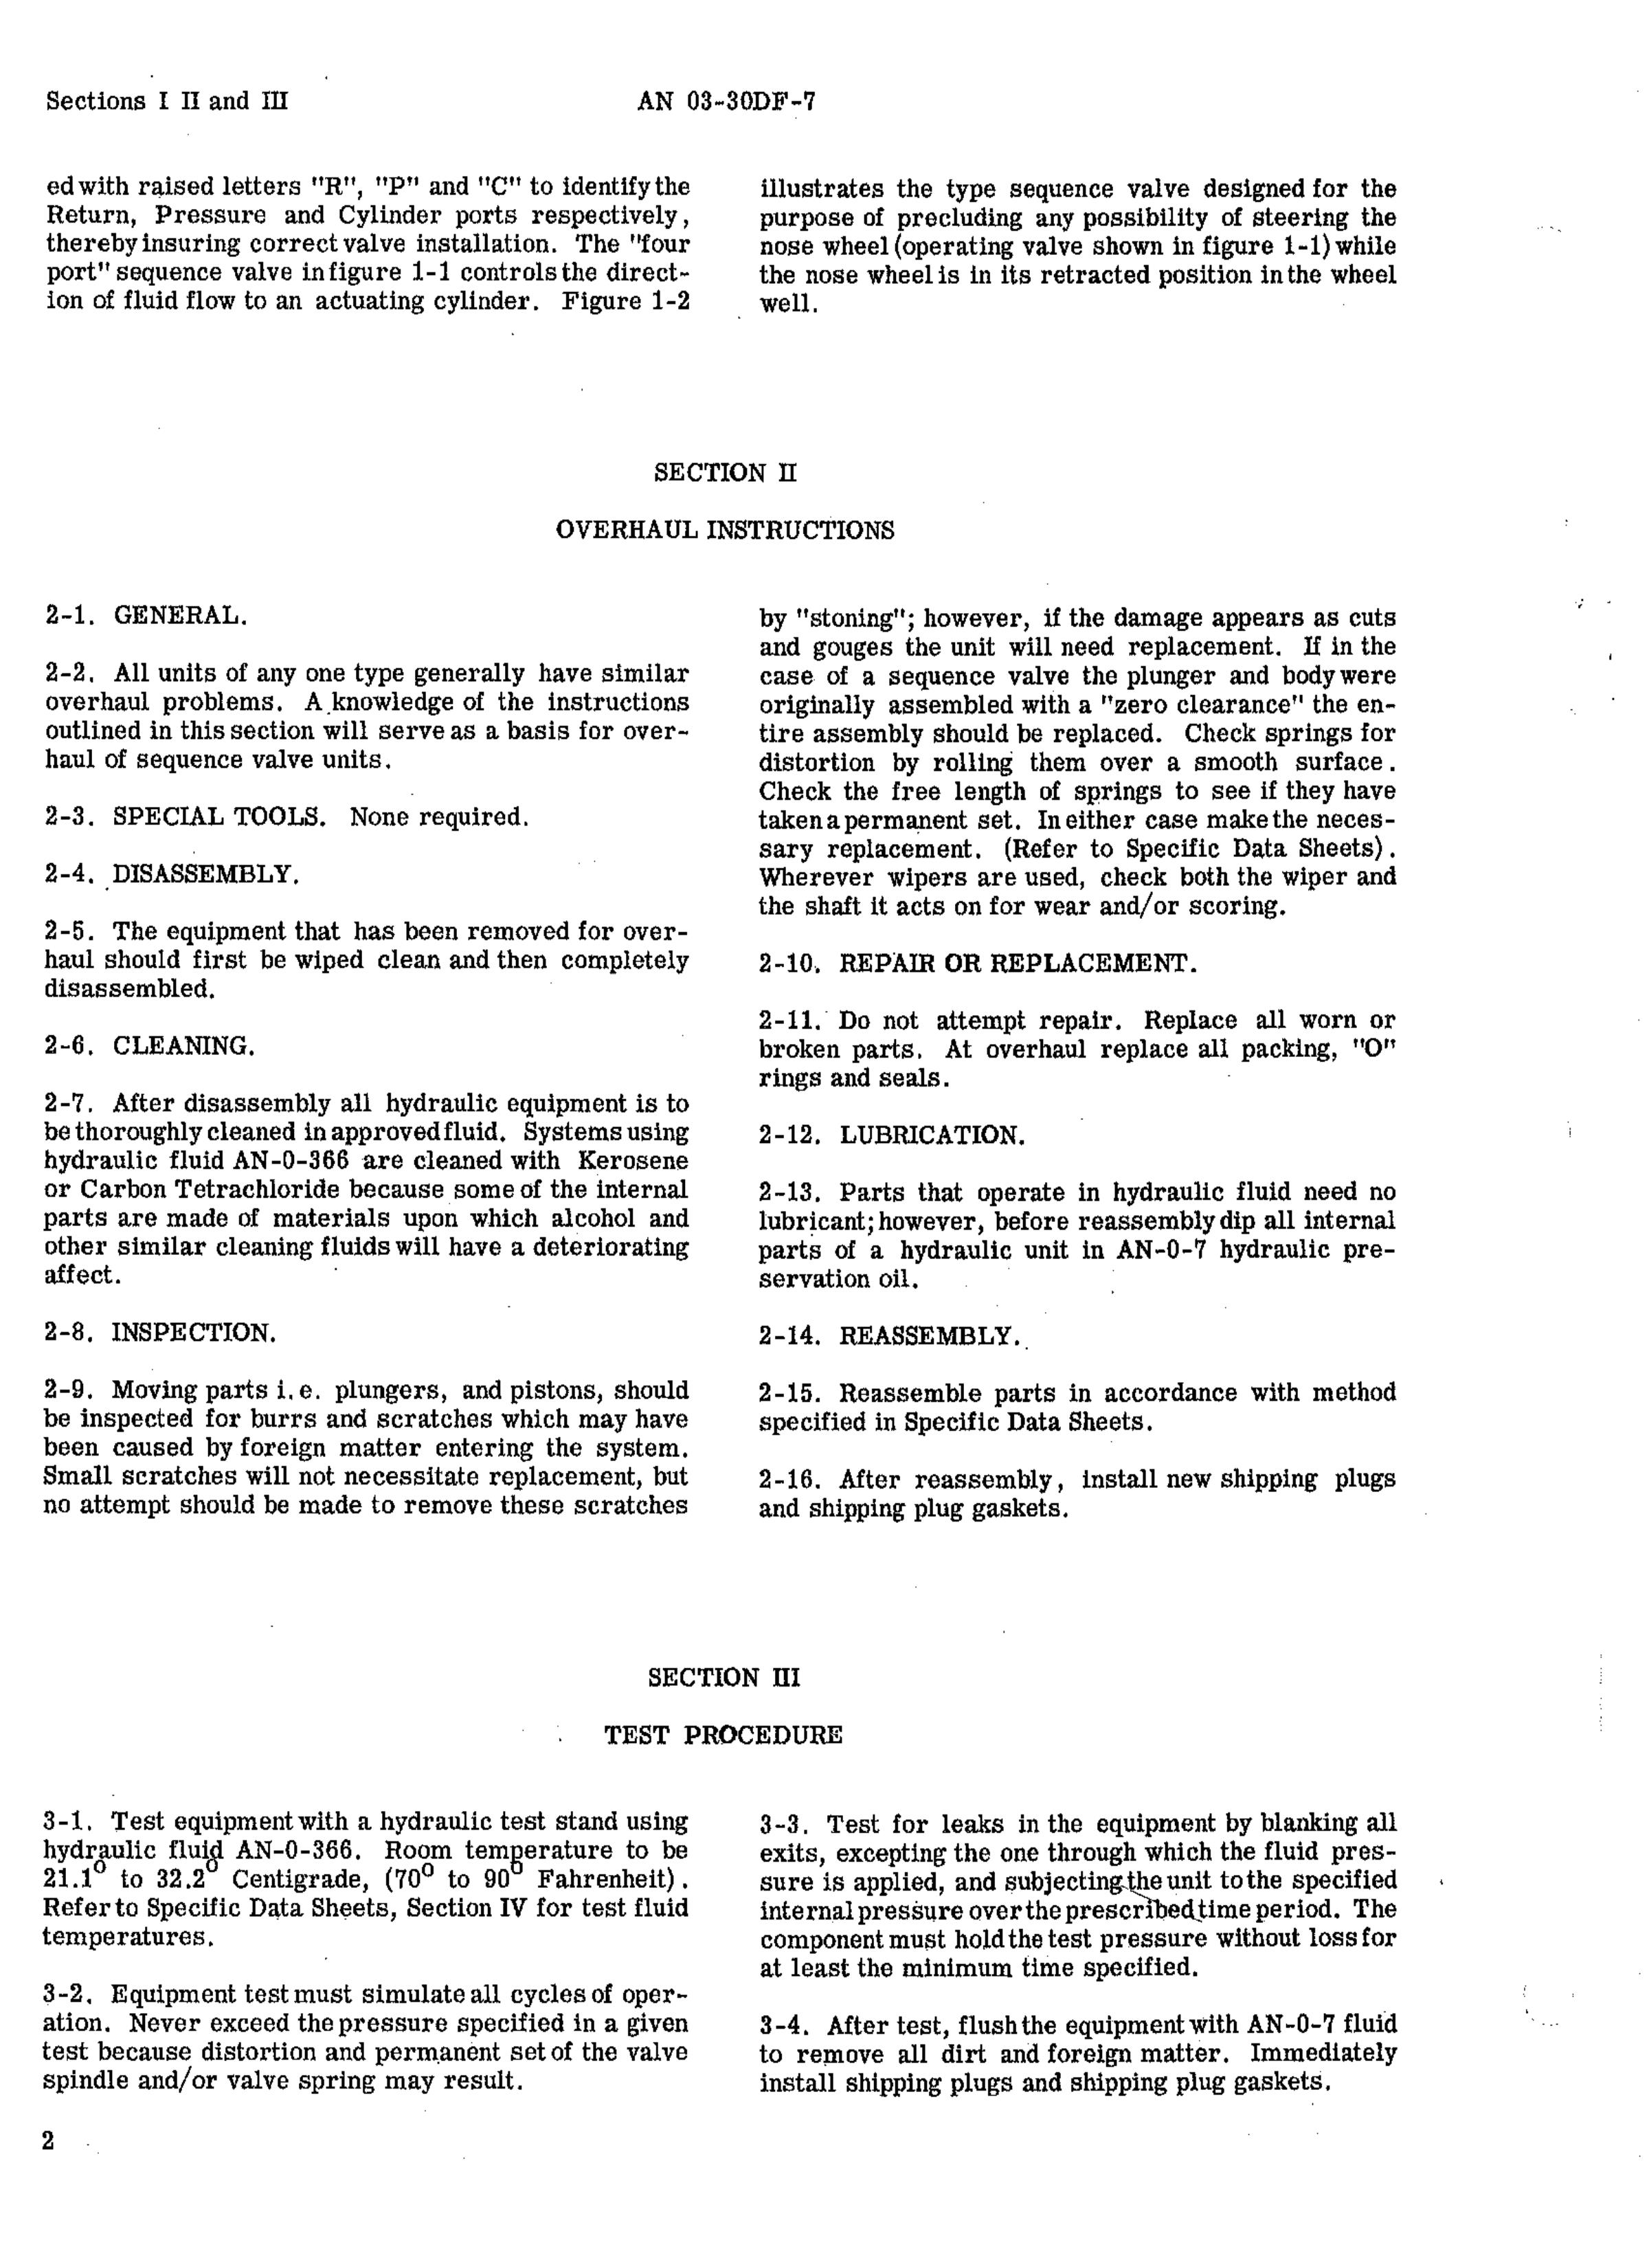 Sample page 4 from AirCorps Library document: Overhaul Instructions for Hydraulic Sequence Valves